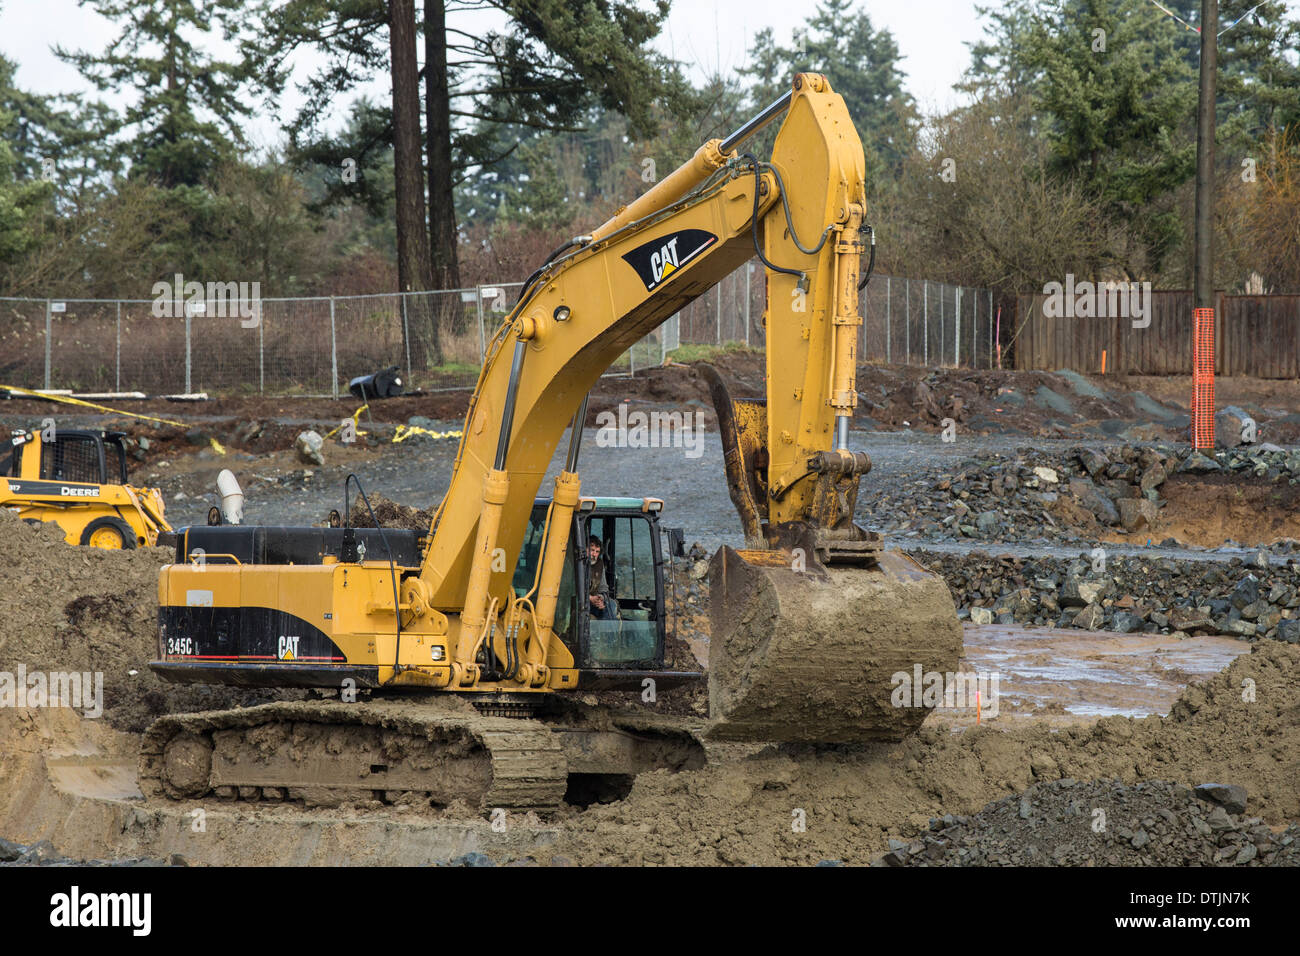 Large excavator machine working on clearing construction site-Victoria, British Columbia, Canada. Stock Photo